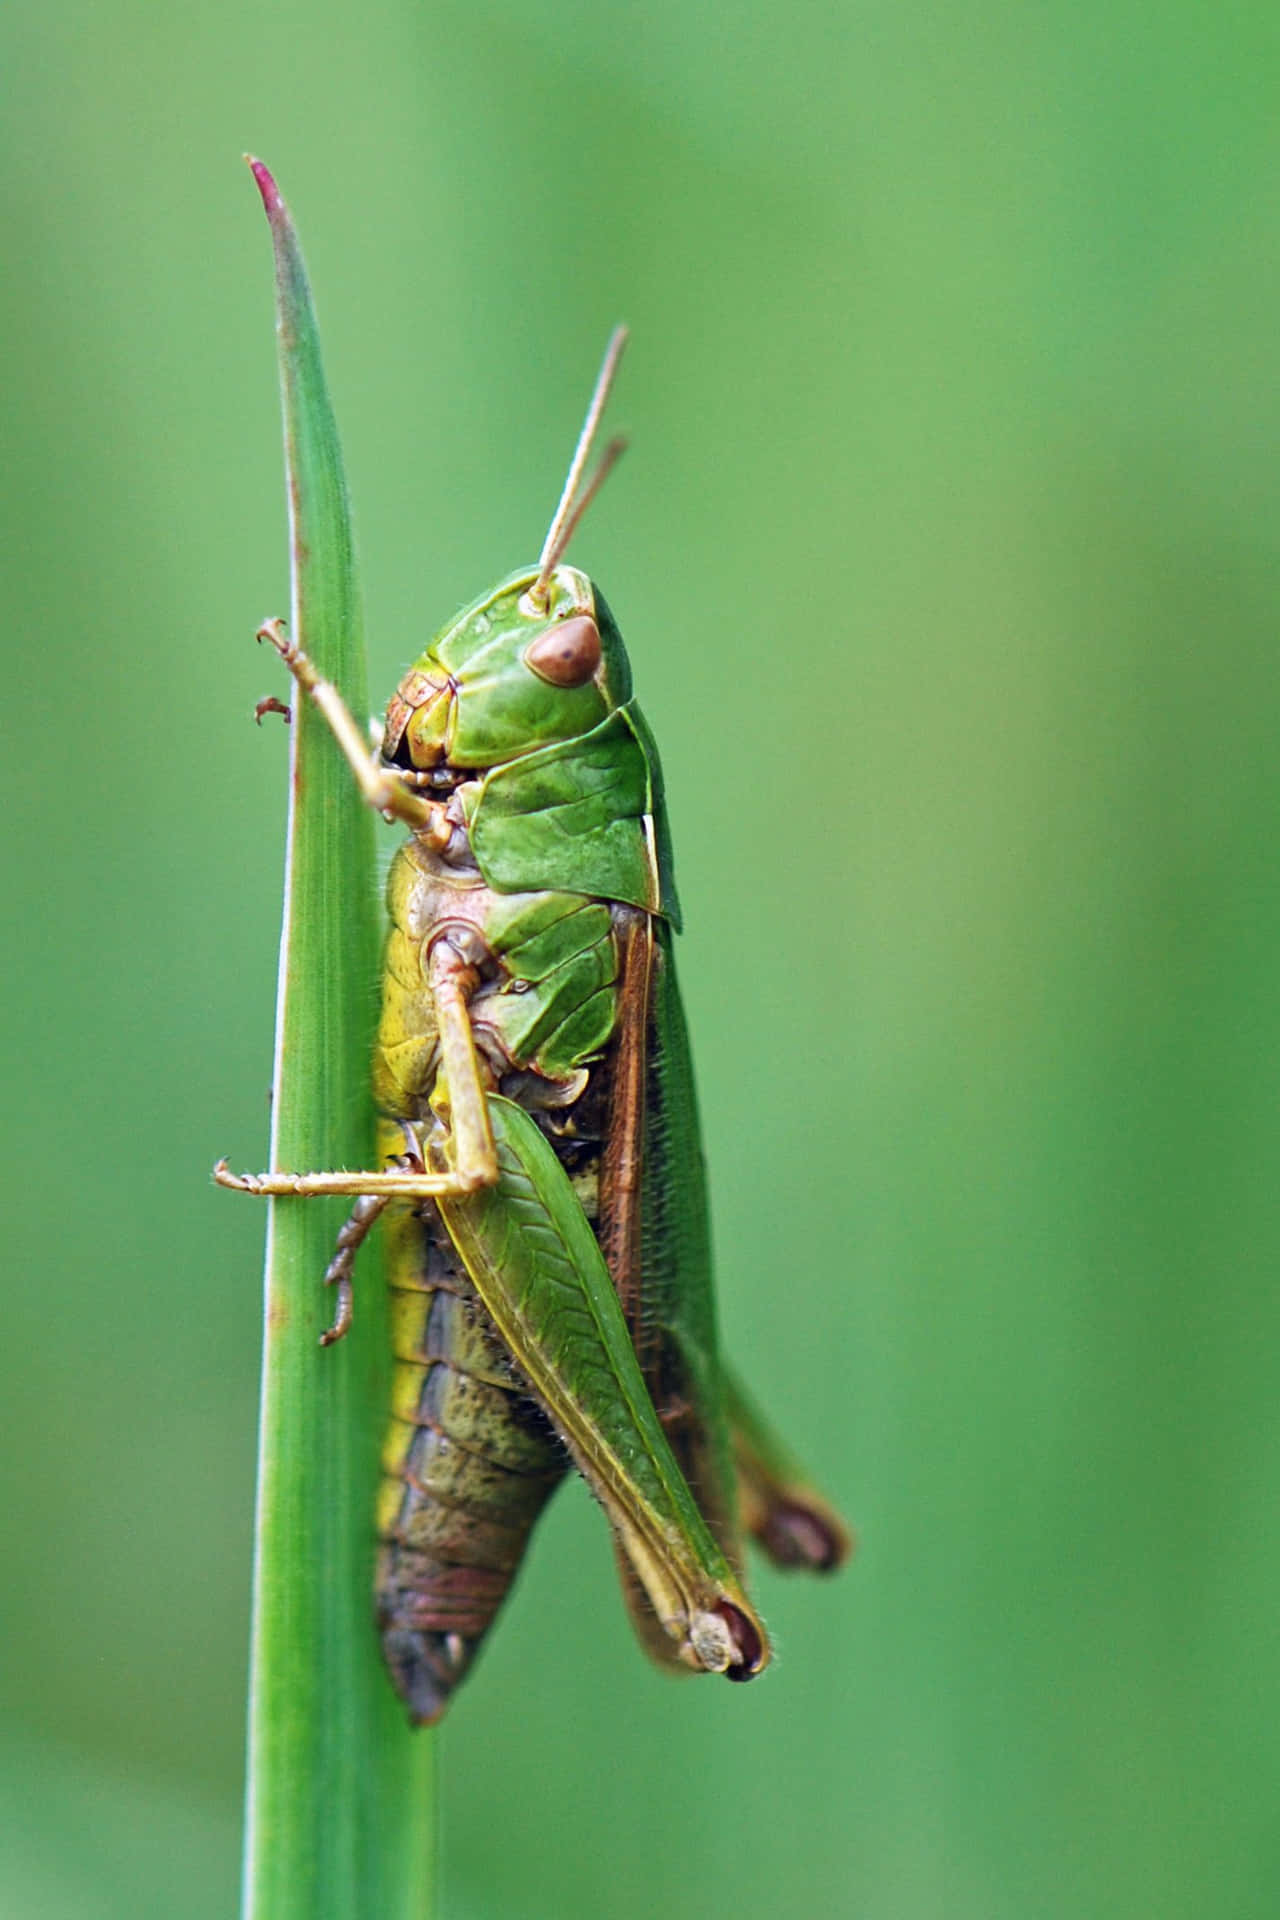 A Stunning Close-up of a Vibrant Green Grasshopper Amidst Nature